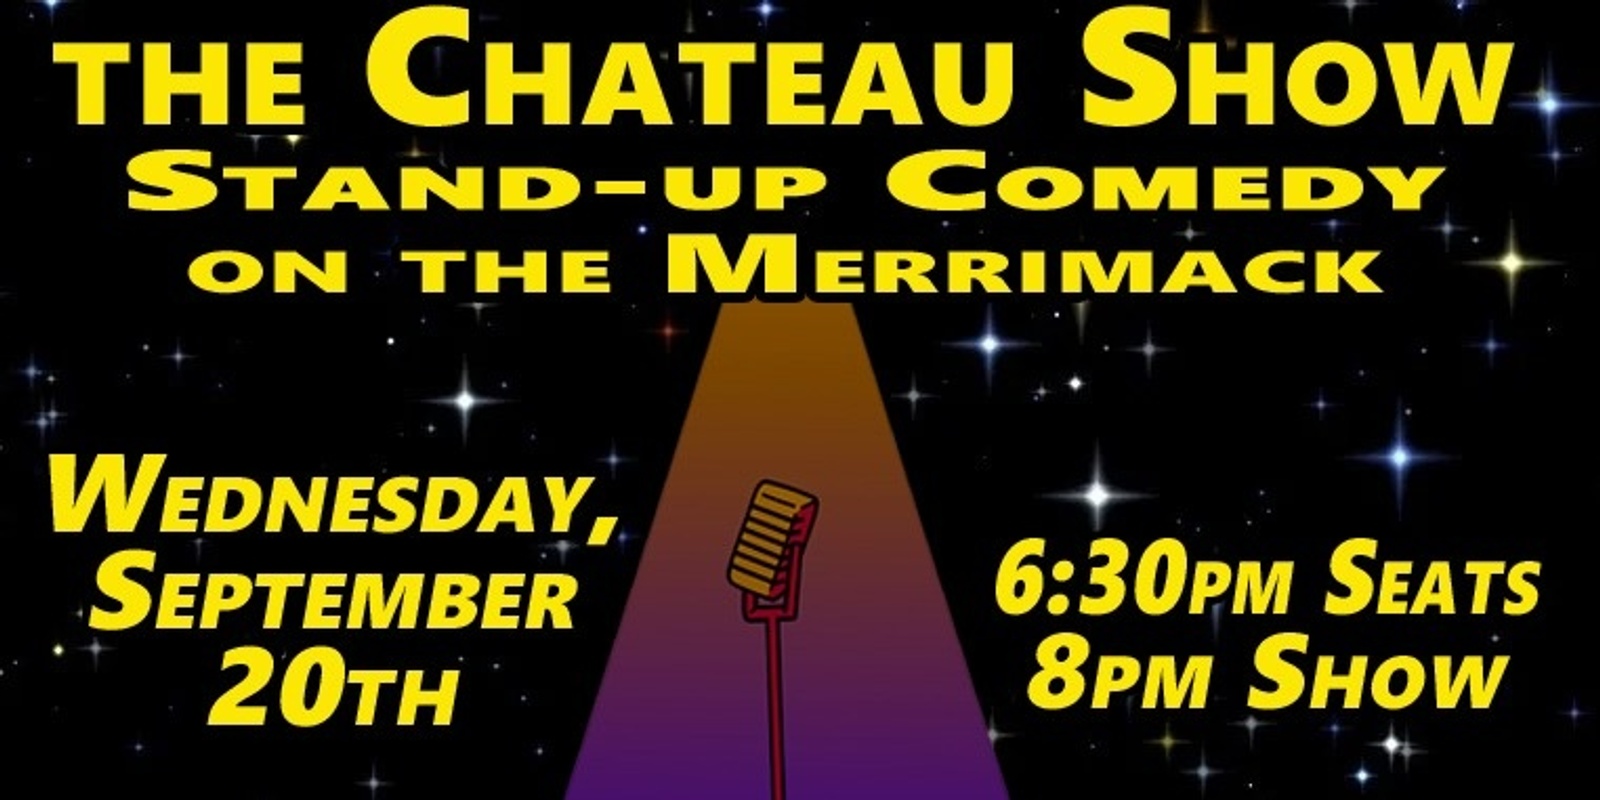 Banner image for the Chateau Show Stand-up Comedy on the Merrimack